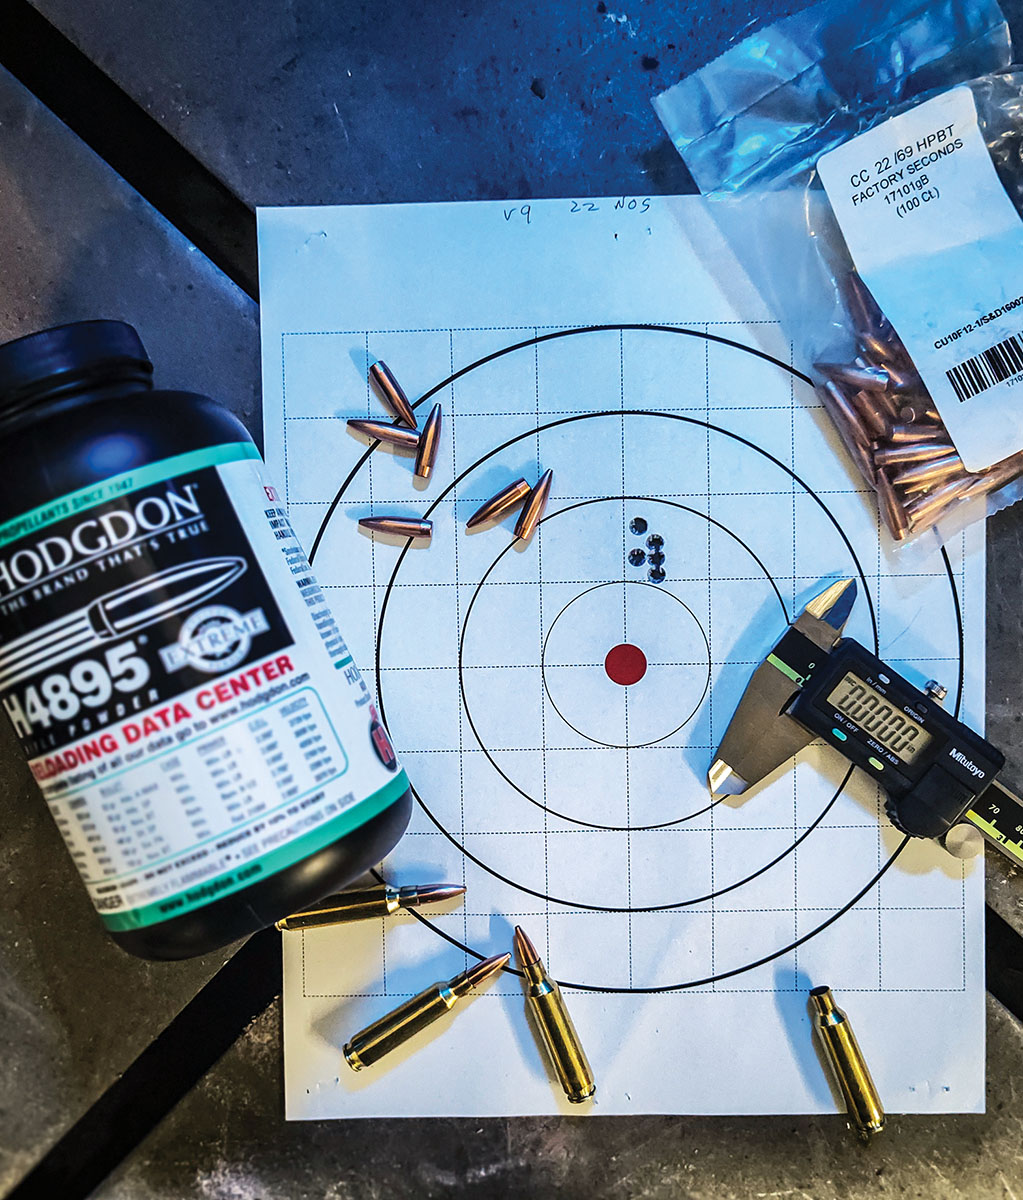 The 22 Nosler performed very well using H-4895 Powder, this group of factory second bullets was nearly identical to a group shot with factory firsts.